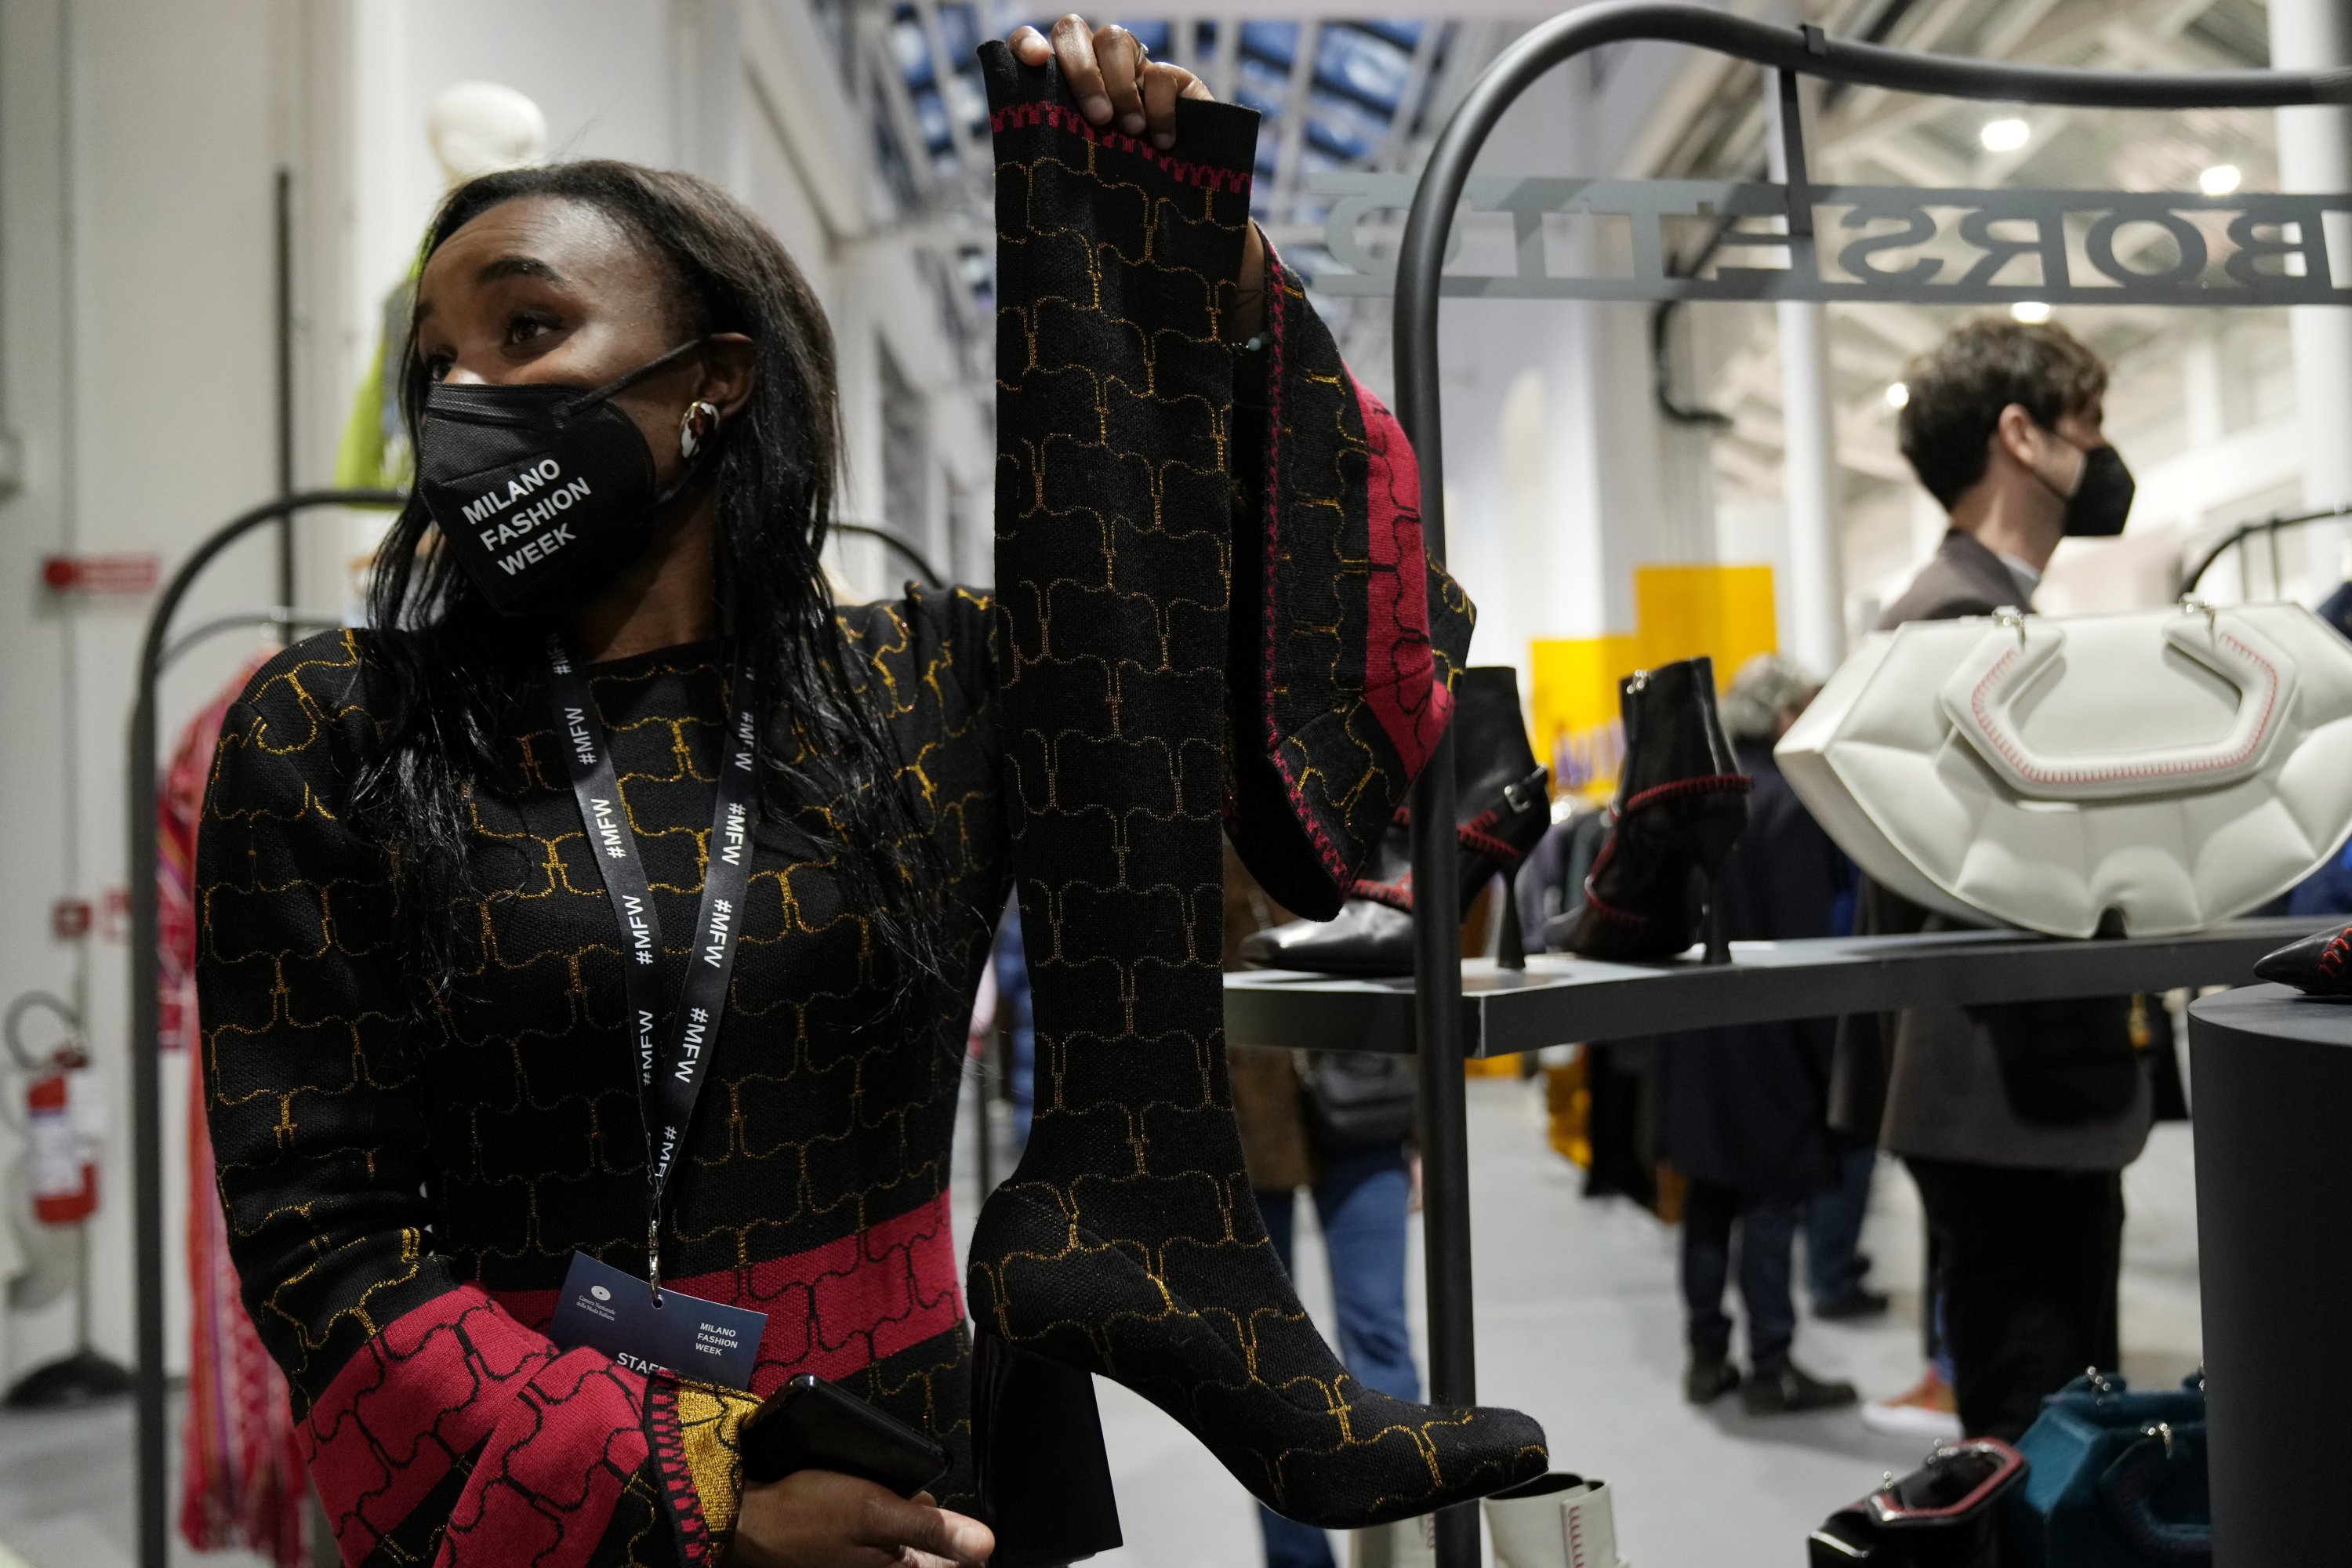 Fashion designer Judith Borsetto, from Haiti, founder of label Judith Saint Jermain, shows her creations, part of the We Are Made in Italy Spring Summer 2022 collective fashion event, unveiled during the Milan Fashion Week, Italy, Feb. 22, 2022. (AP Photo)